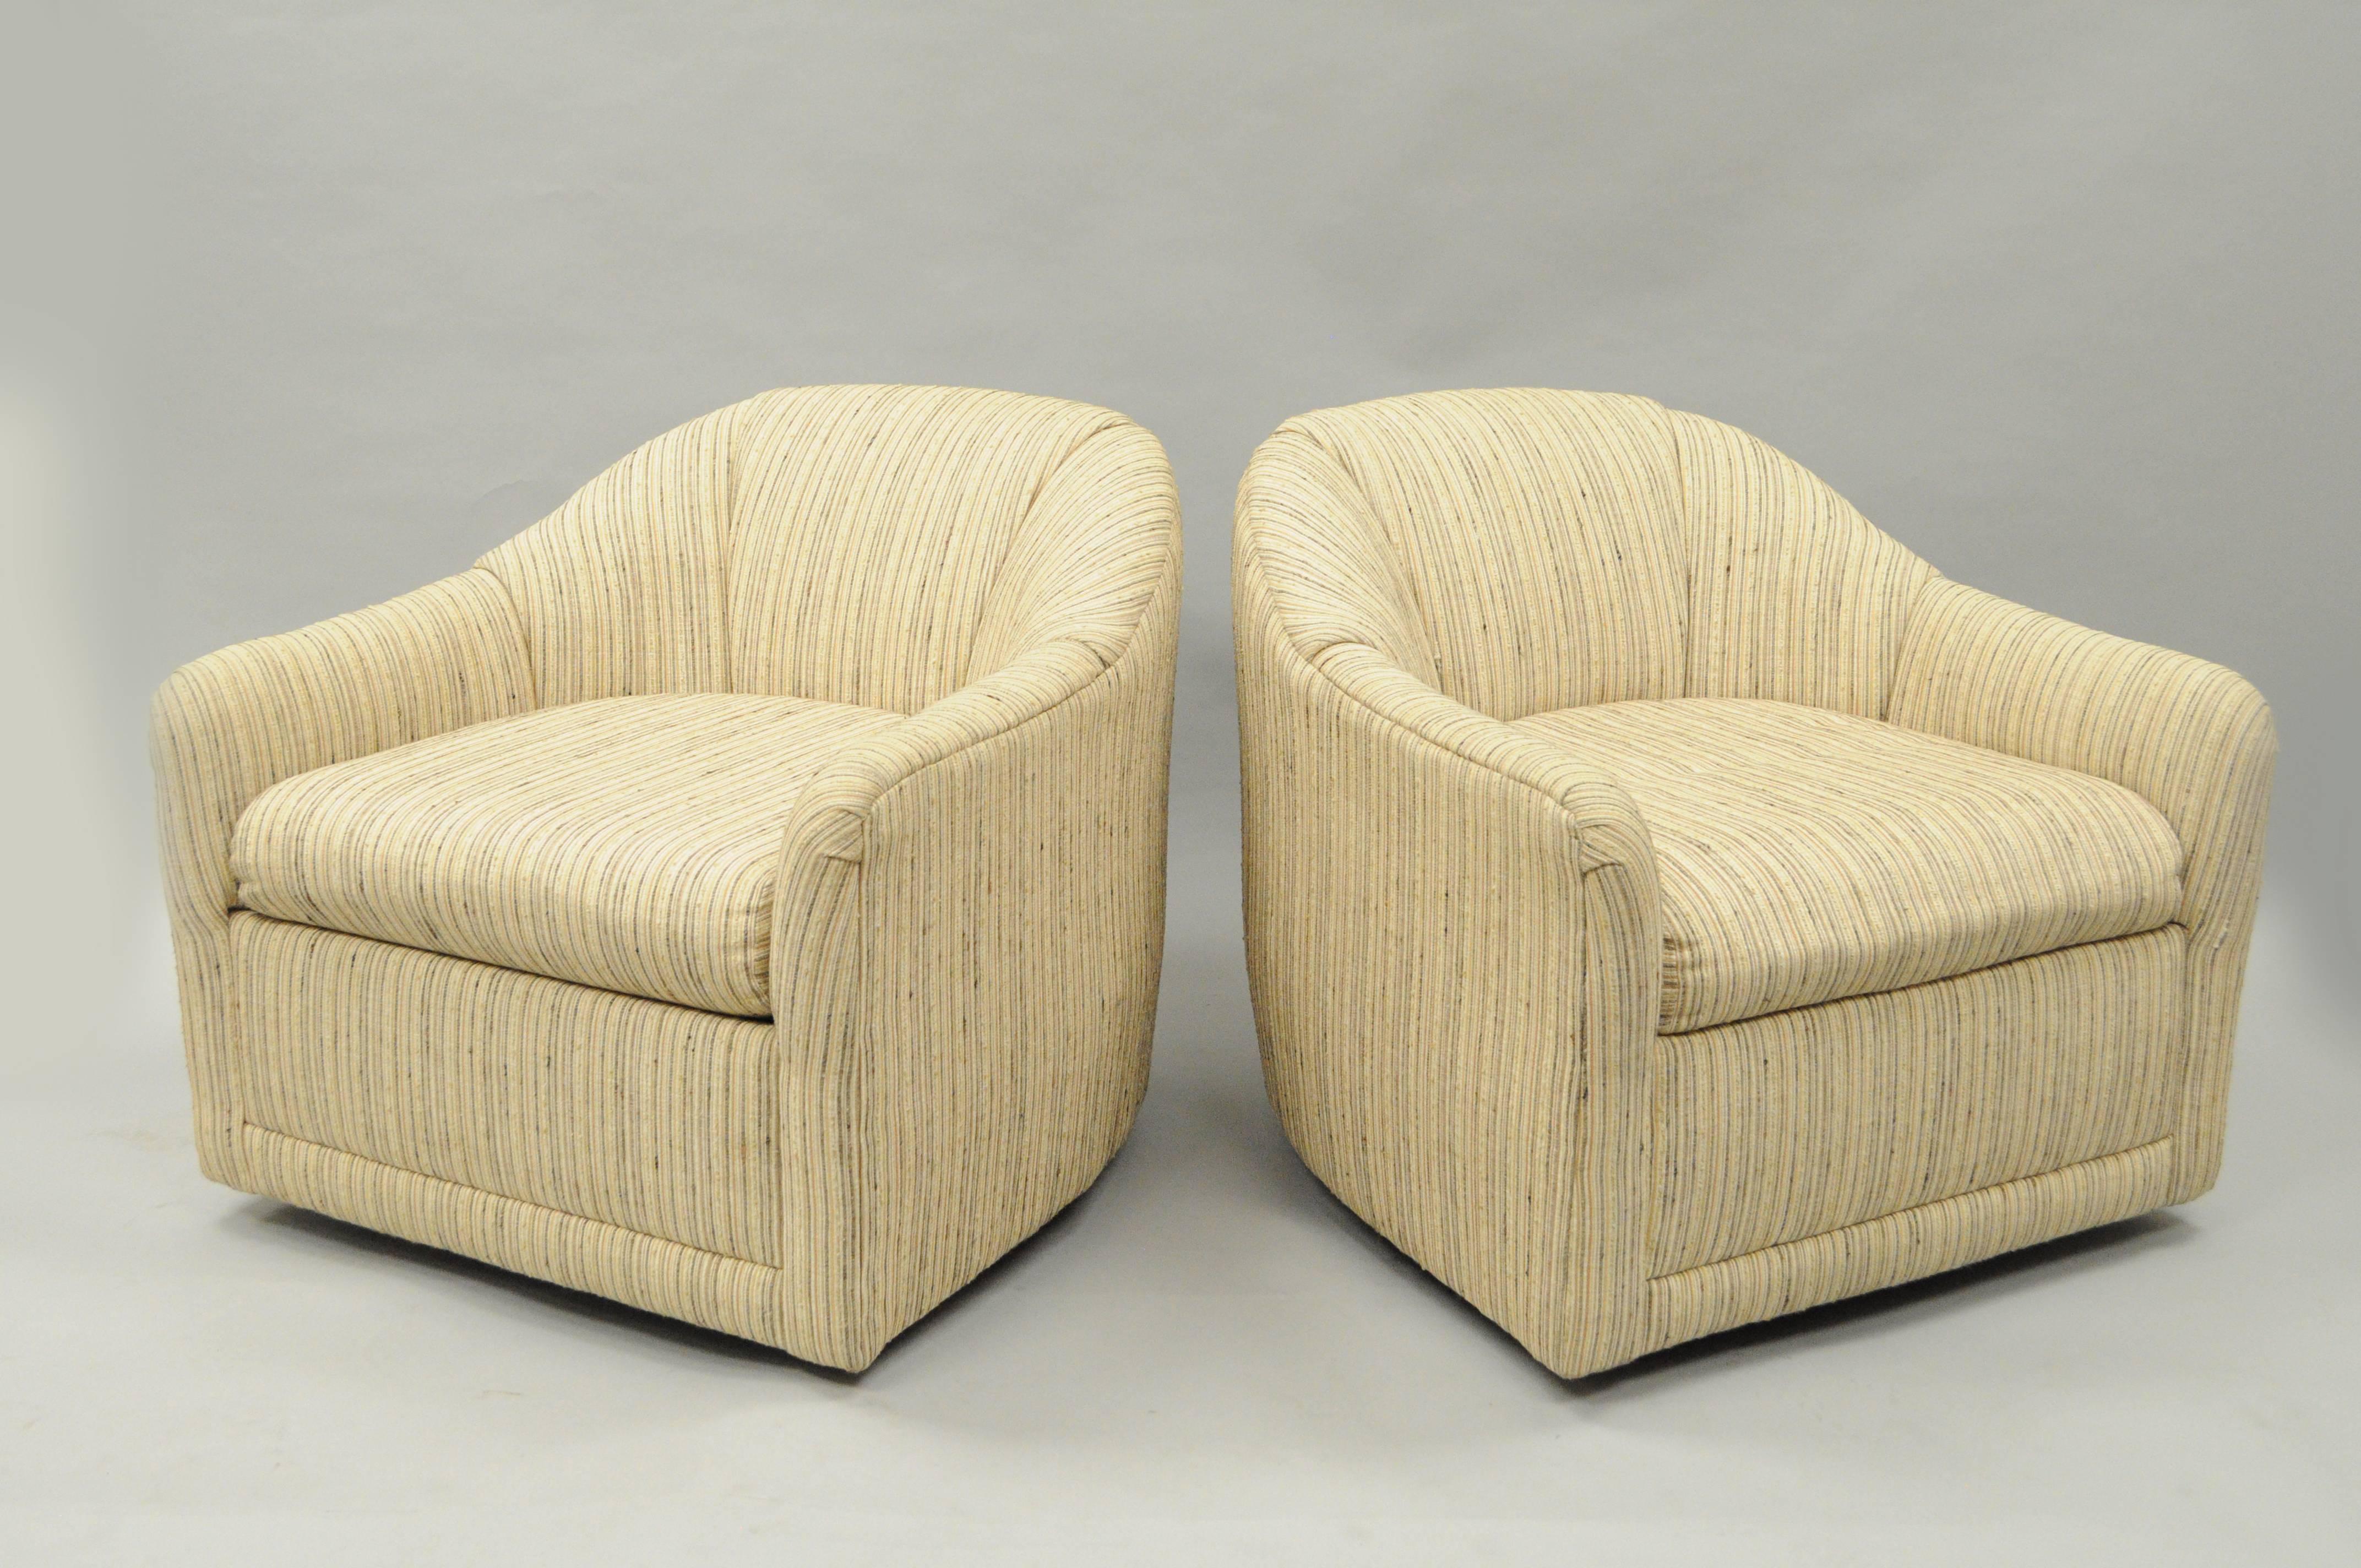 Original vintage pair of upholstered Mid-Century Modern barrel back revolving club lounge armchairs by Selig. Chairs feature clean Modernist lines, metal swivel star bases, fully upholstered frames in the original beige nubby weave fabric, and